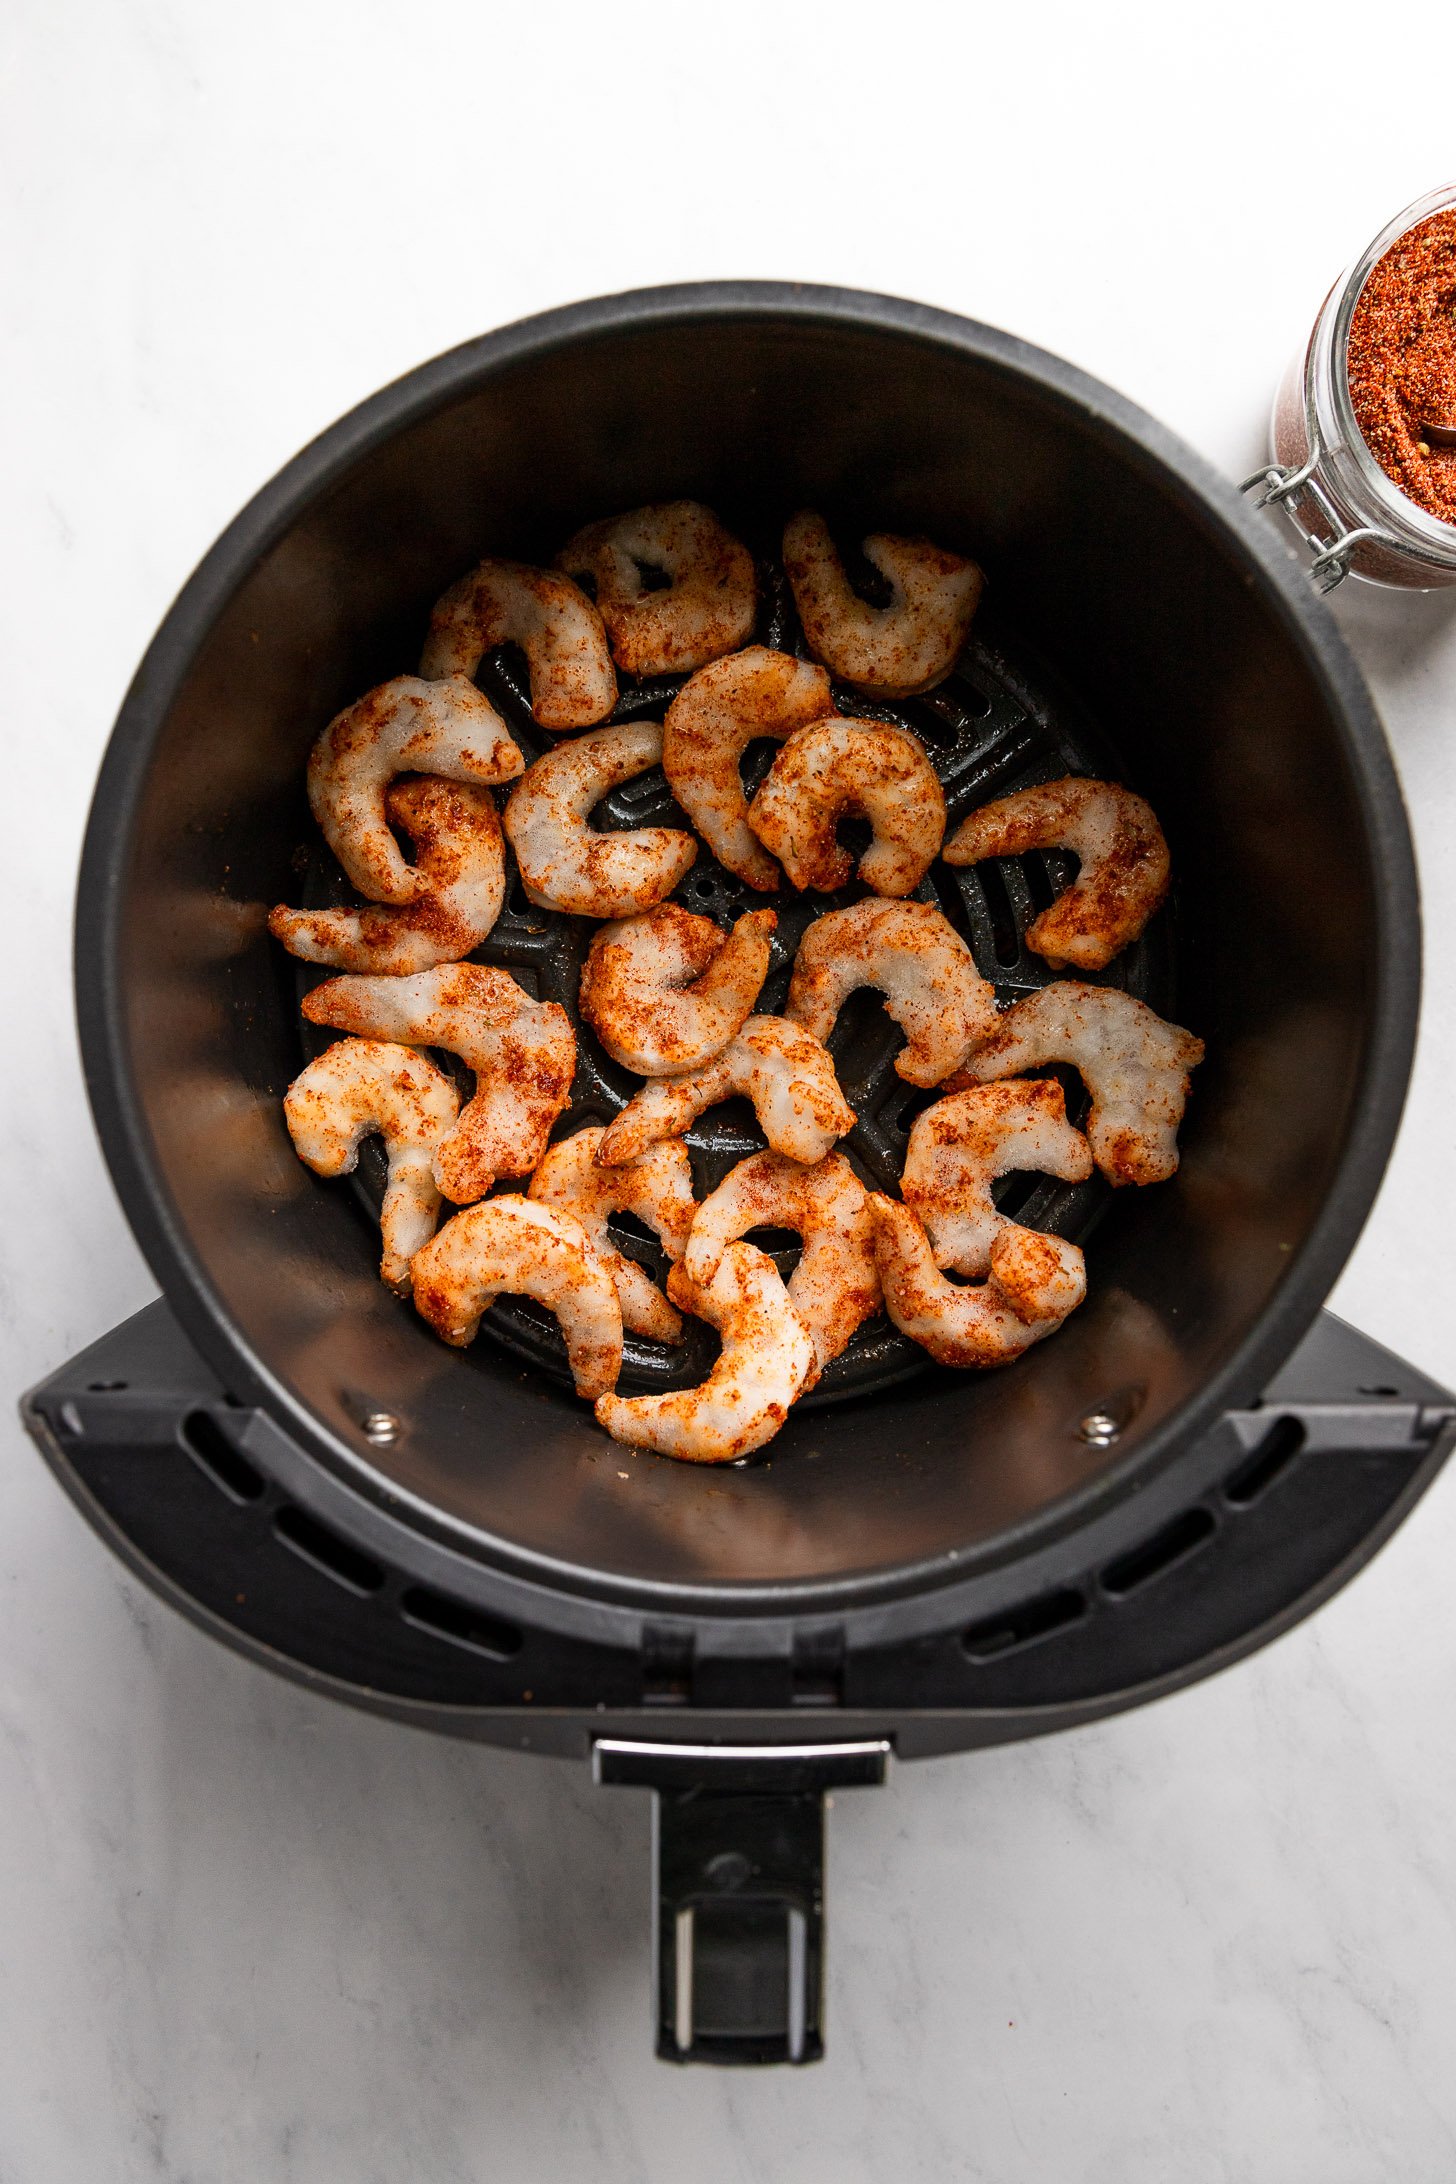 Shrimp in air fryer basket before cooking tossed with cajun spice.